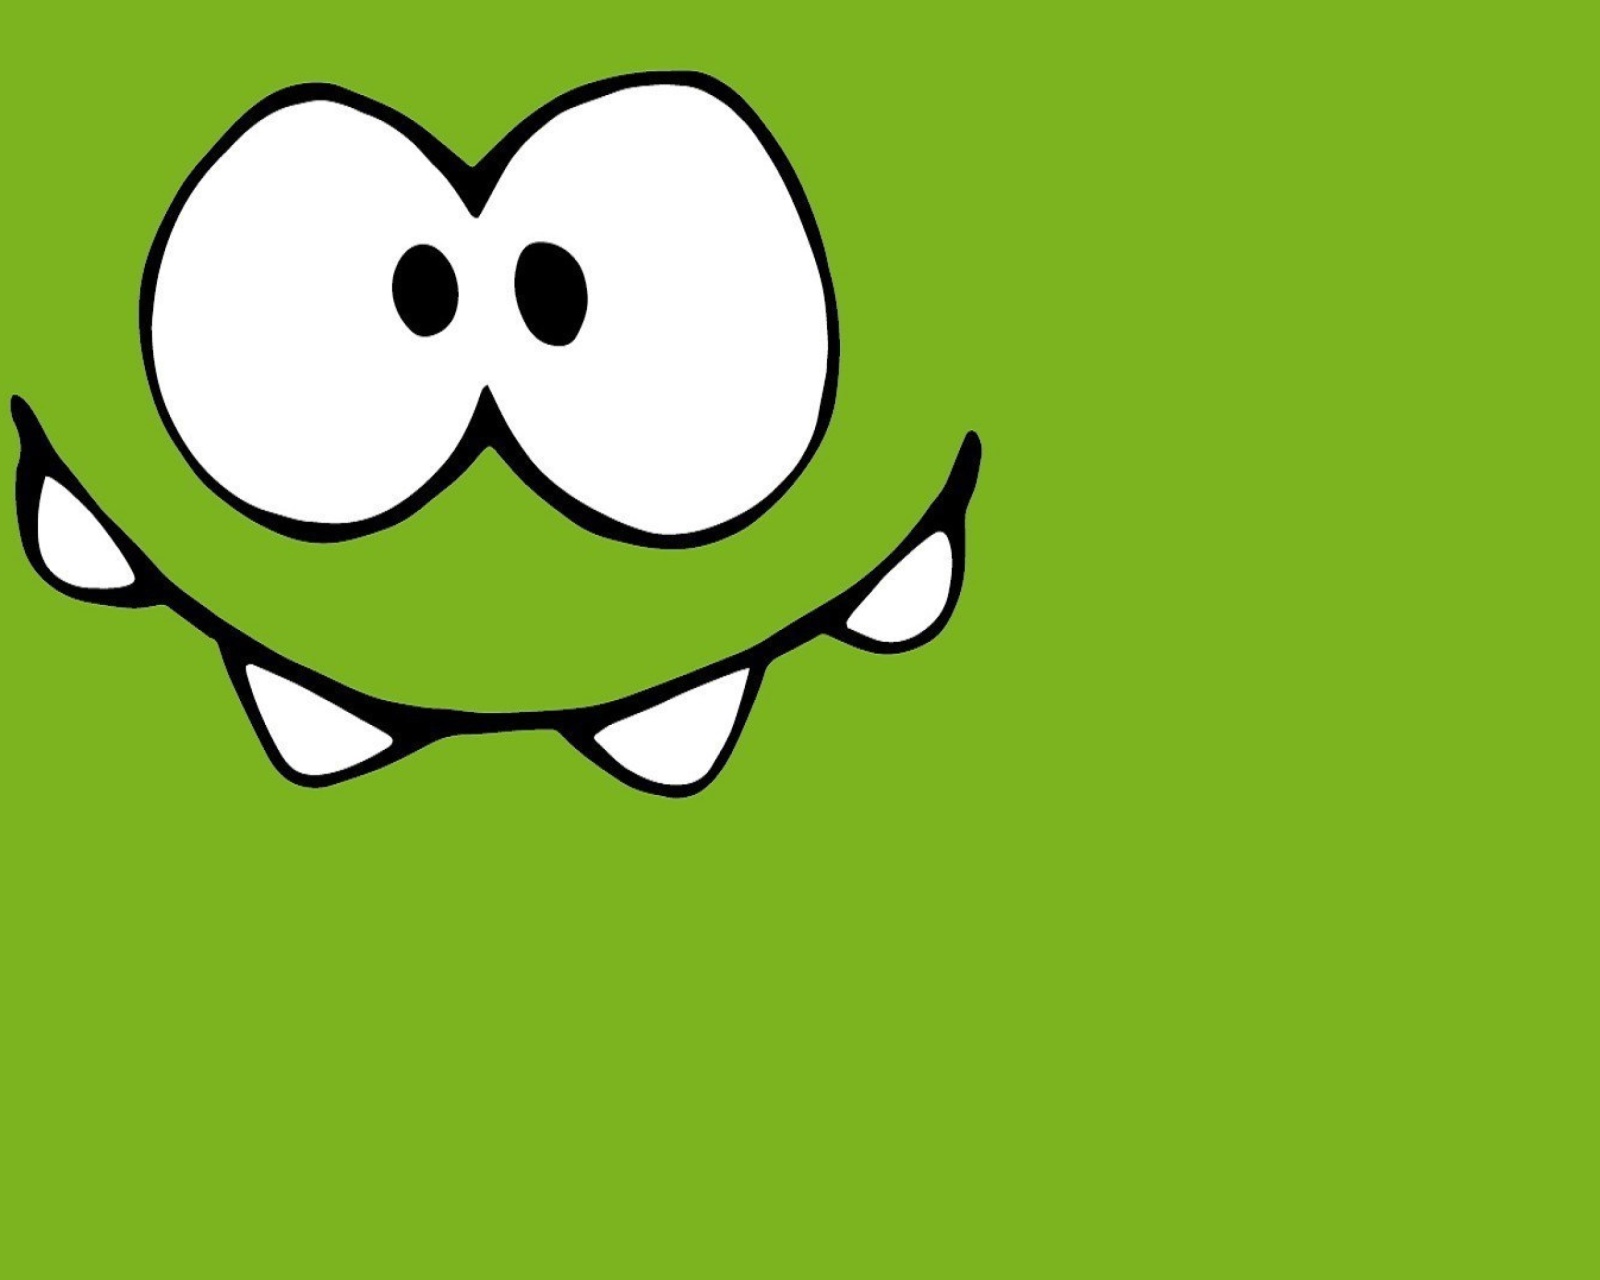 Om Nom from game Cut the Rope screenshot #1 1600x1280